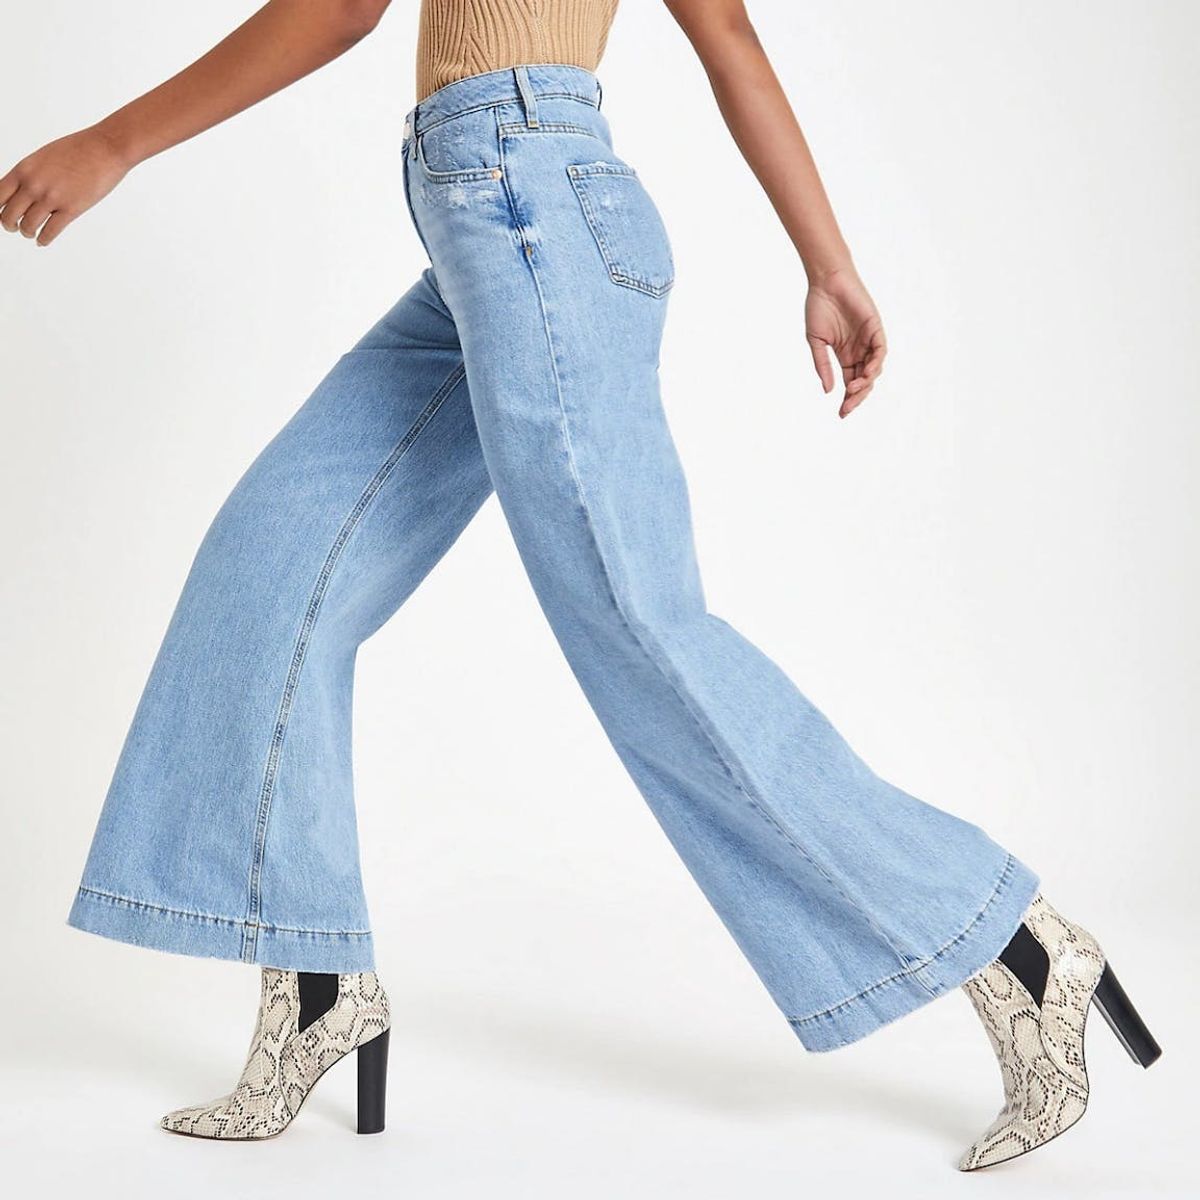 19 Denim Buys That Were Practically Made for Long-Legged Ladies